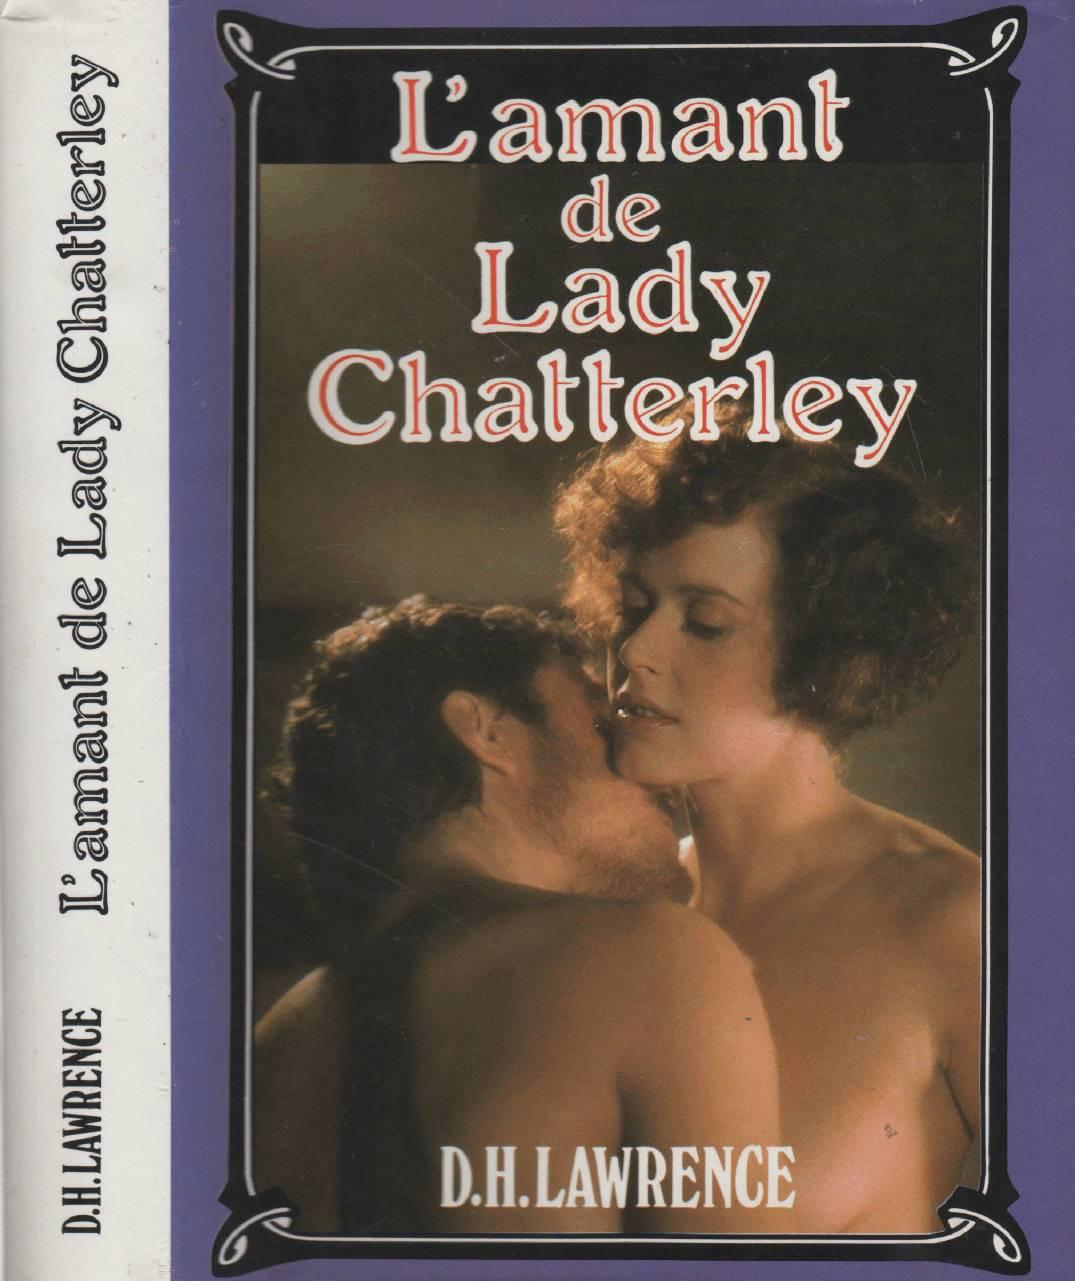 L'Amant de Lady Chatterley - French edition 1985